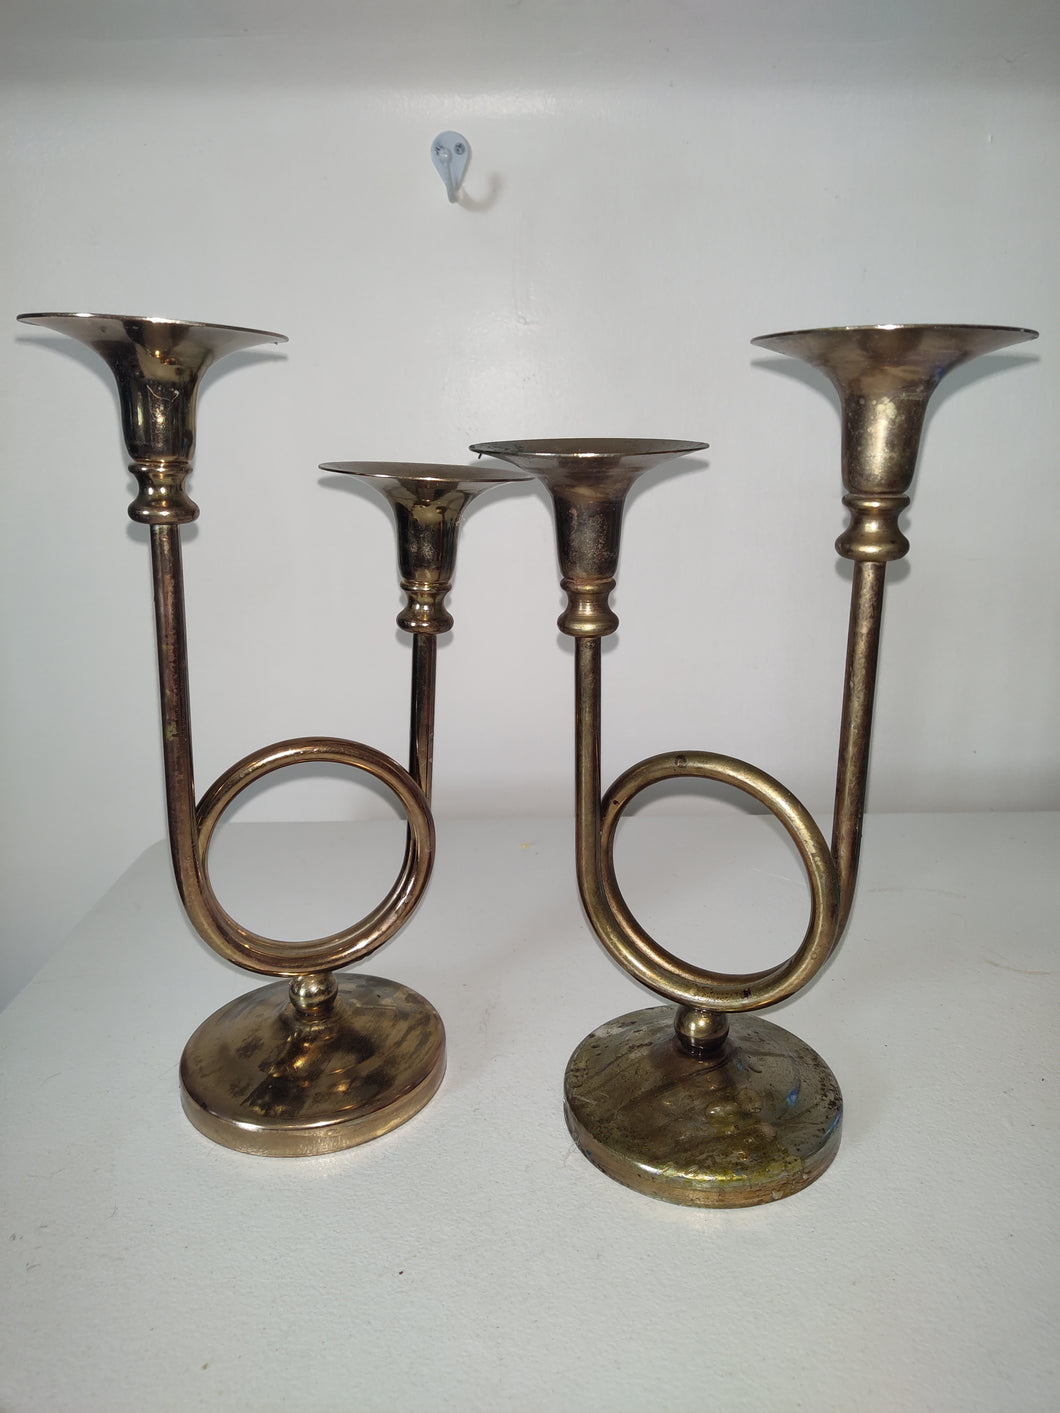 Vintage 1970s Brass French Horn Double Candle Holders Candlesticks